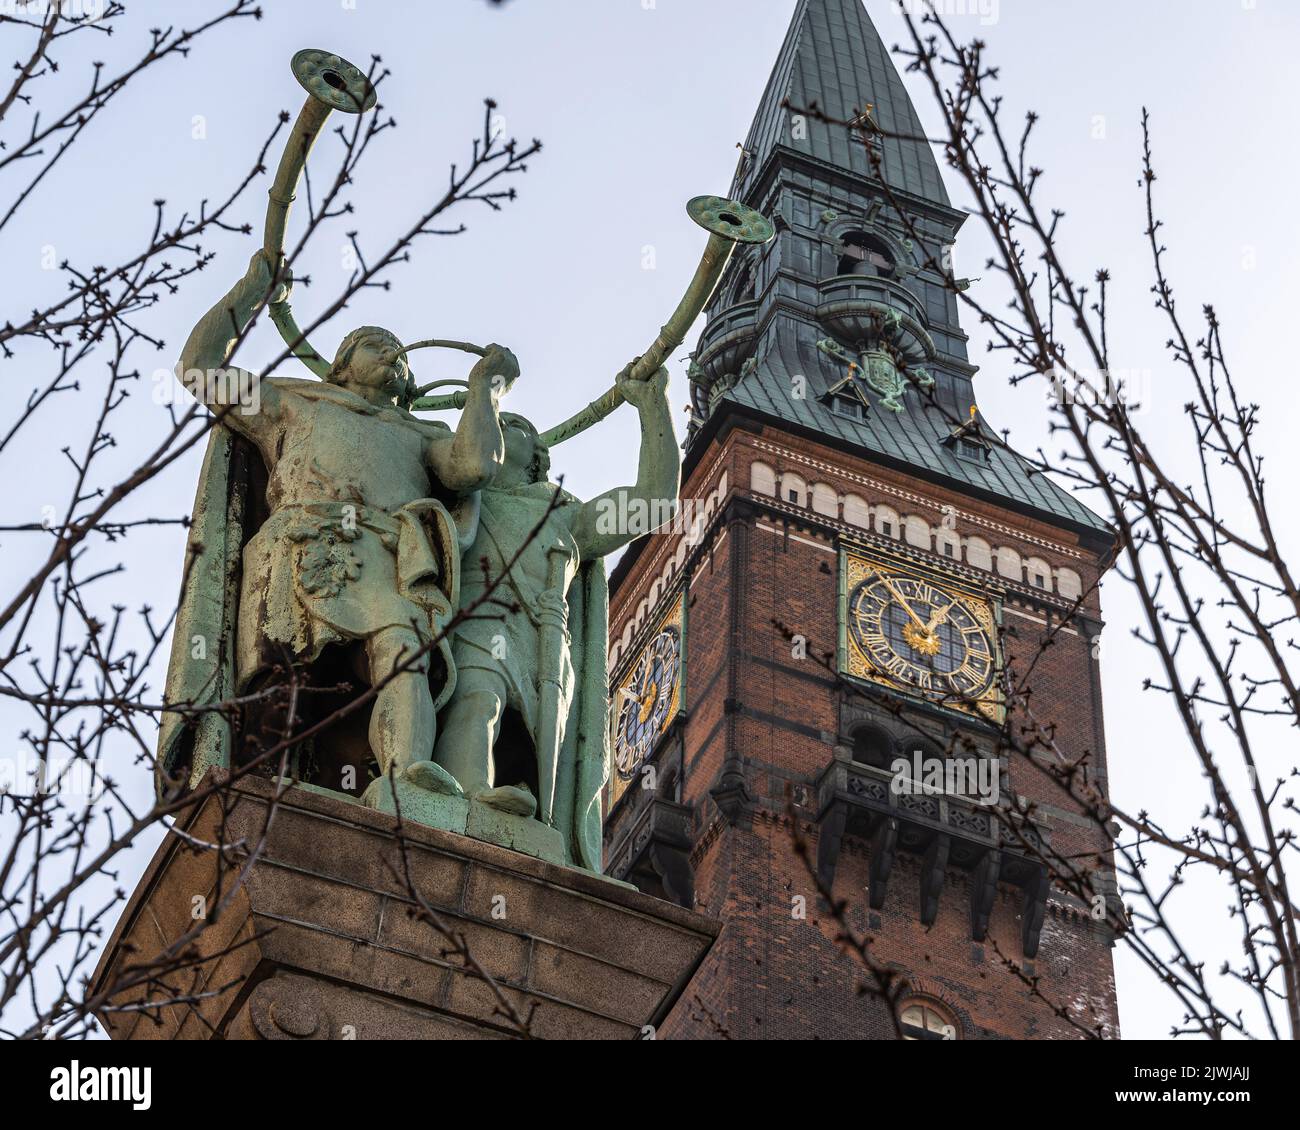 The Lur Blowers monument located near the Copenhagen City Hall. Bronze sculpture of two lur players on top of a high column. Copenhagen, Denmark Stock Photo